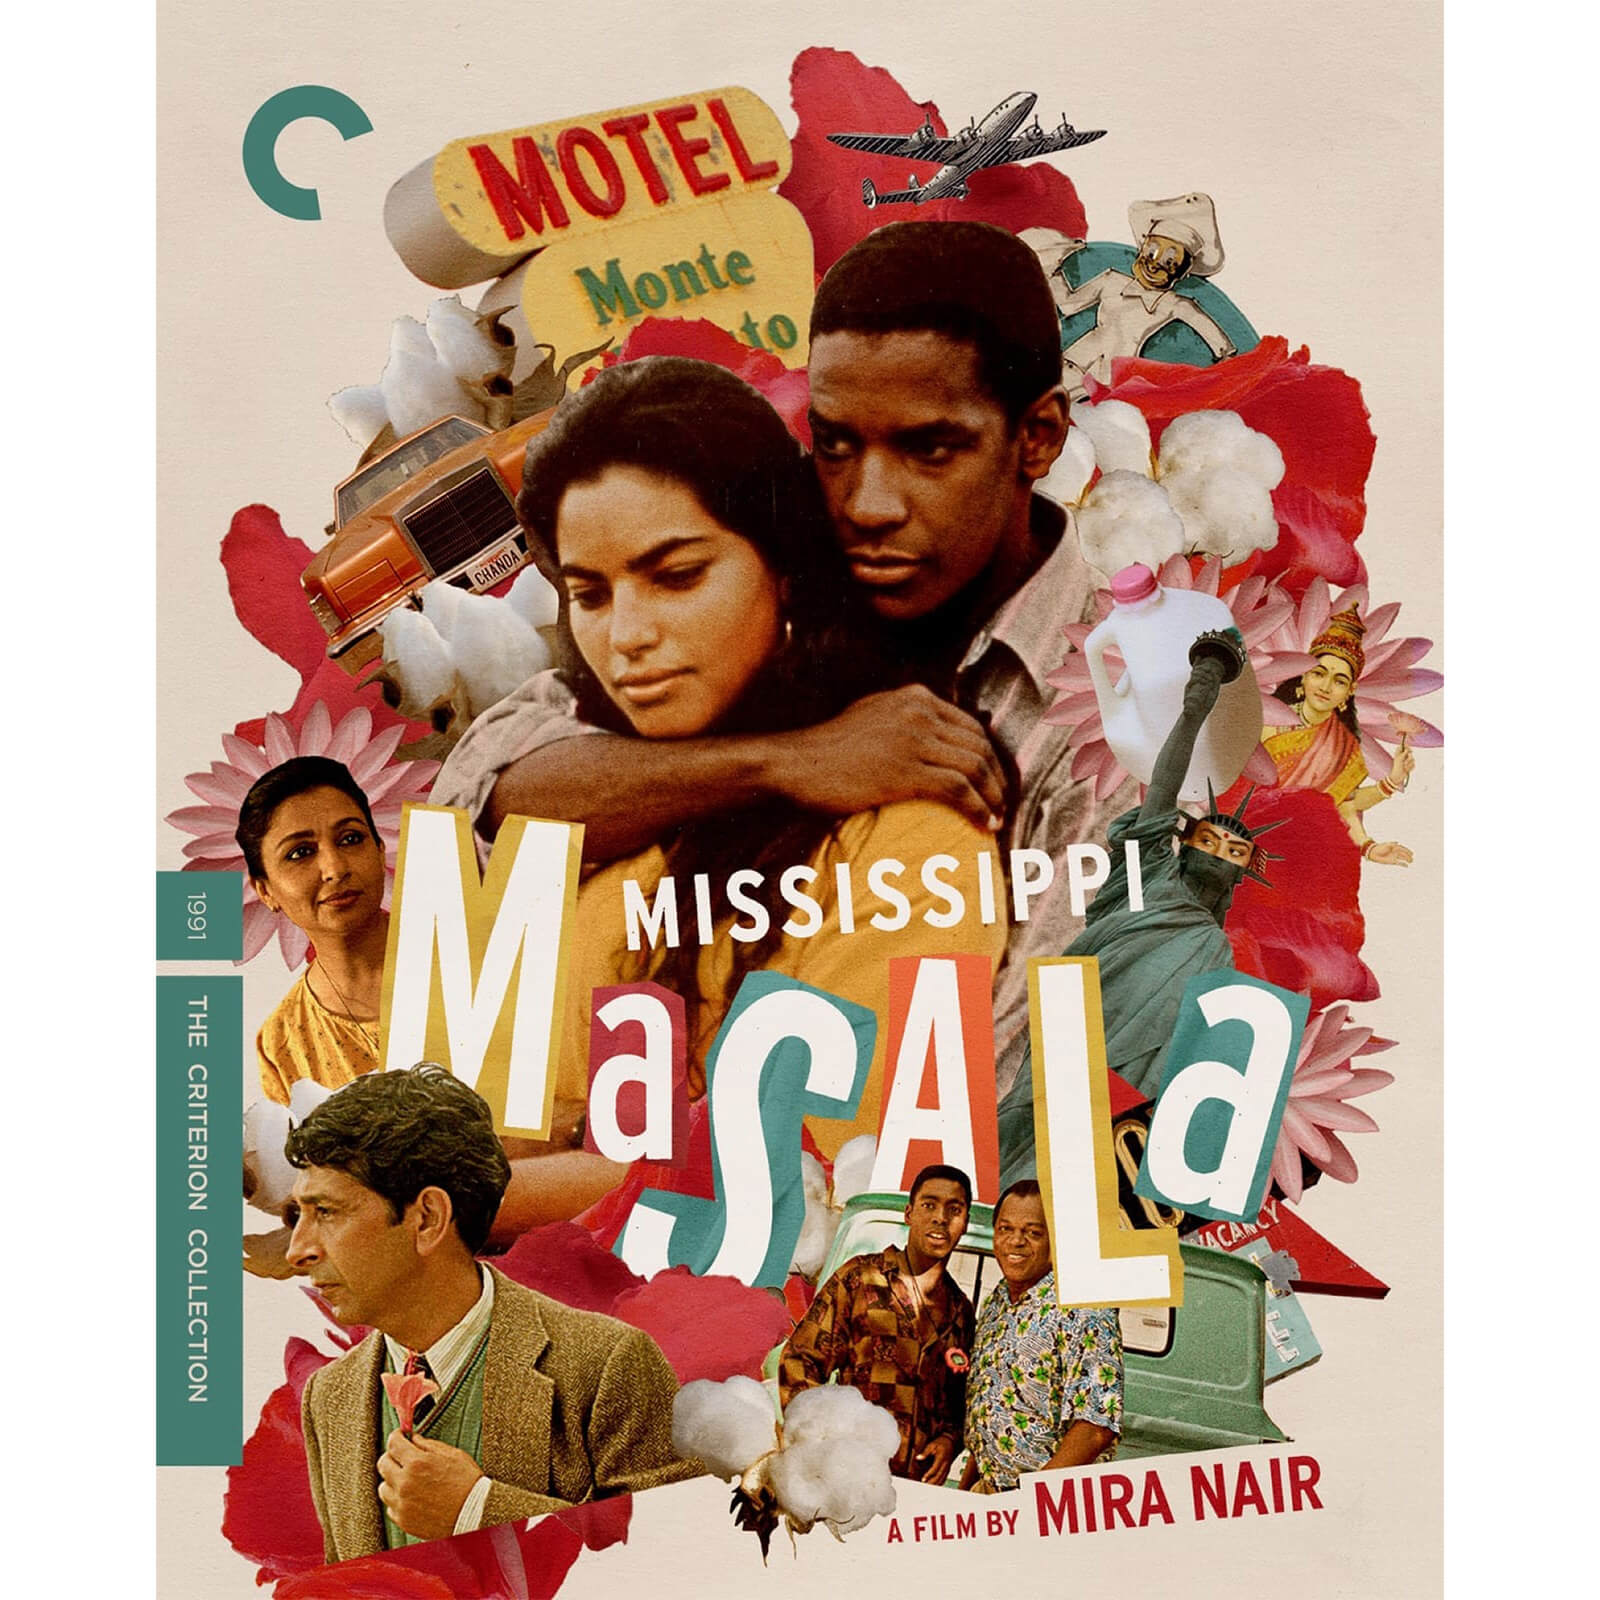 

Mississippi Masala - The Criterion Collection